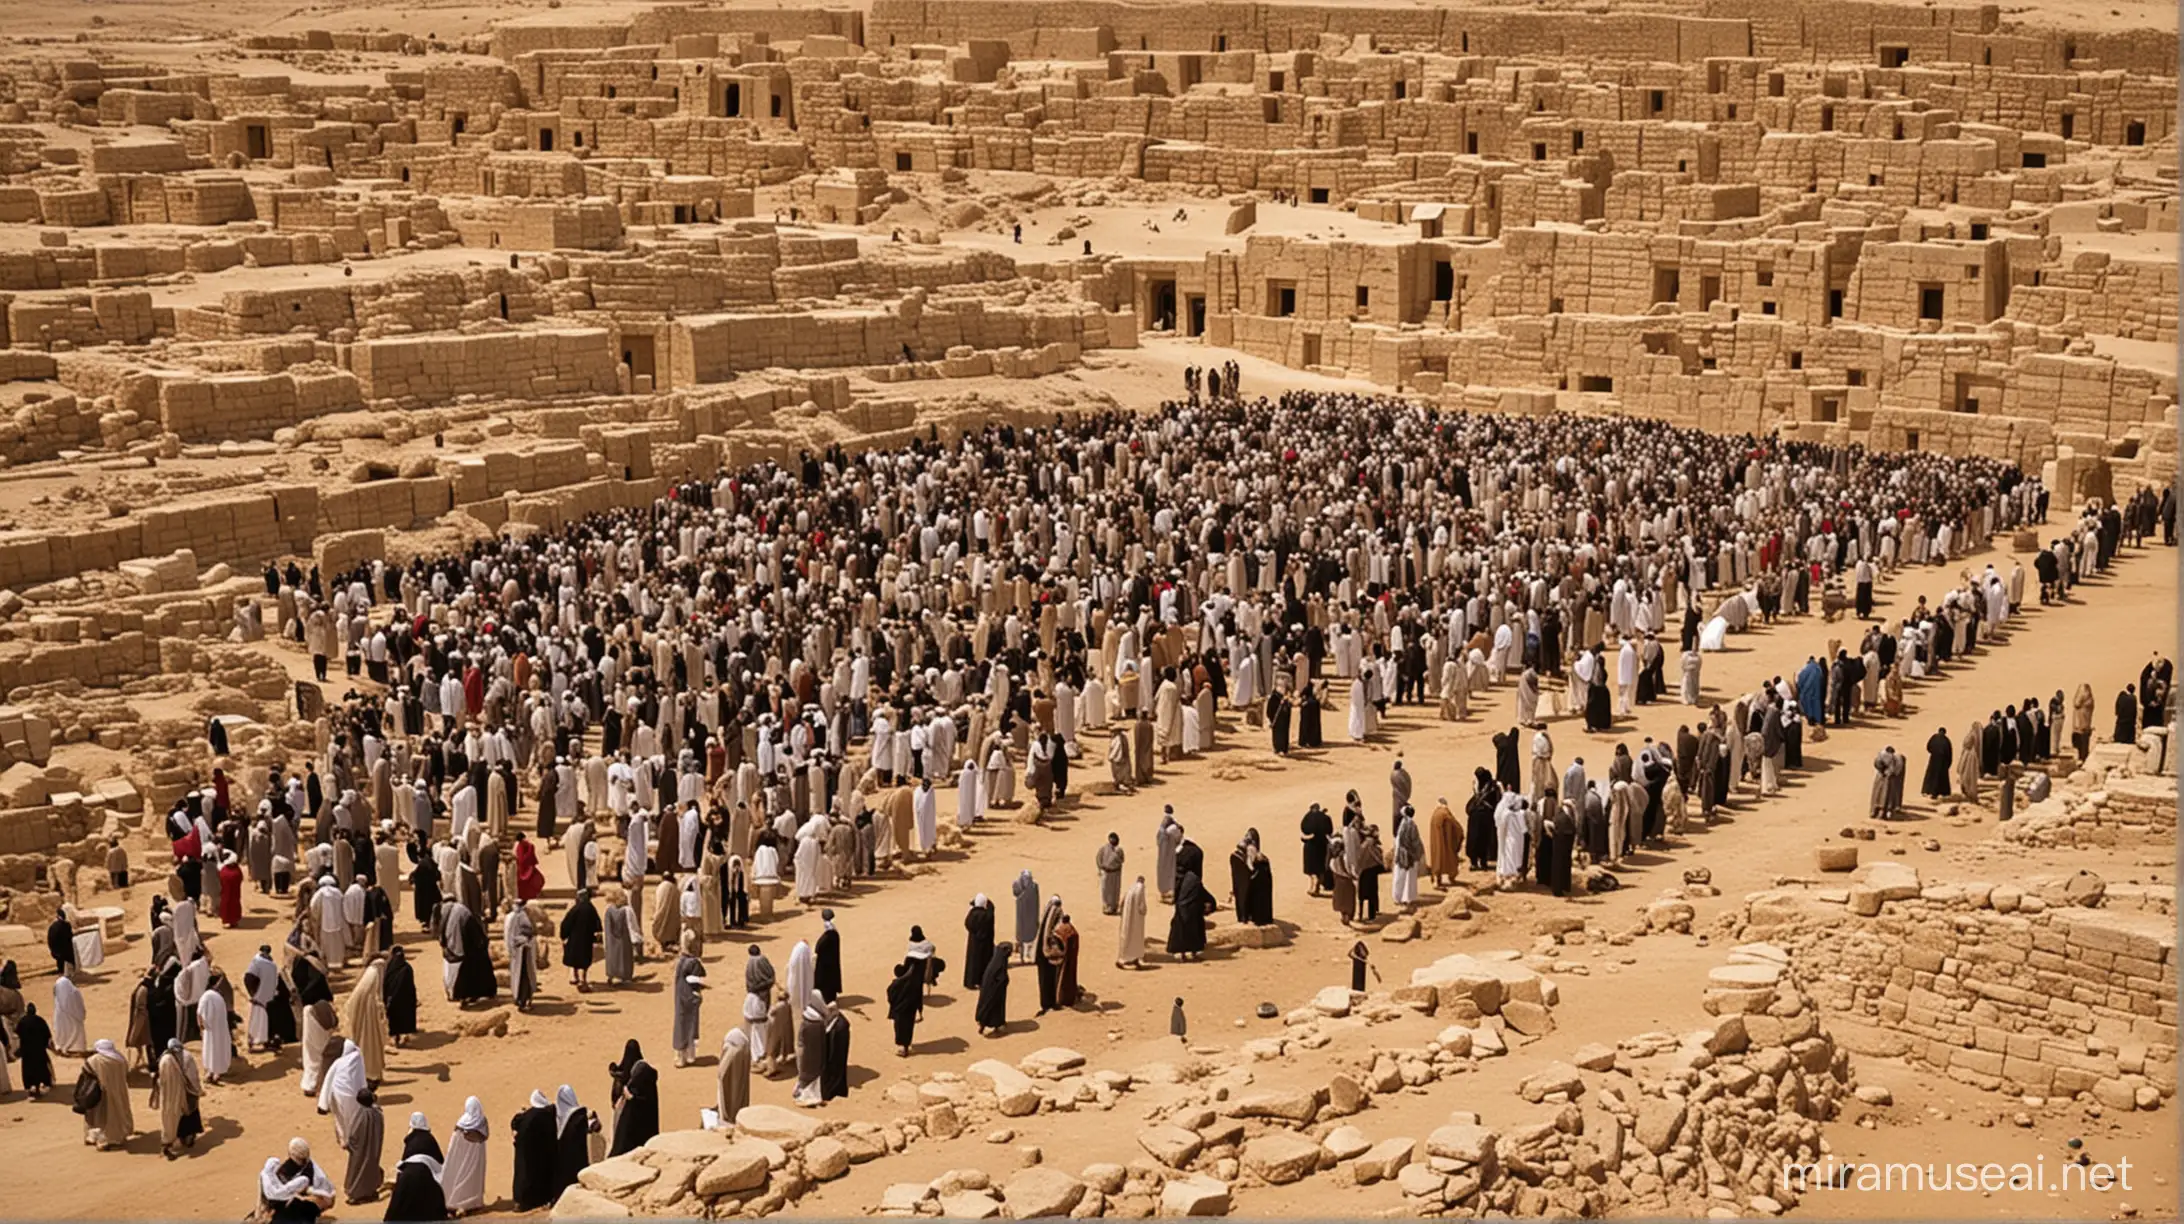 a gathing of people for a funeral, The setting is in the middle east during the biblical time of Abraham.